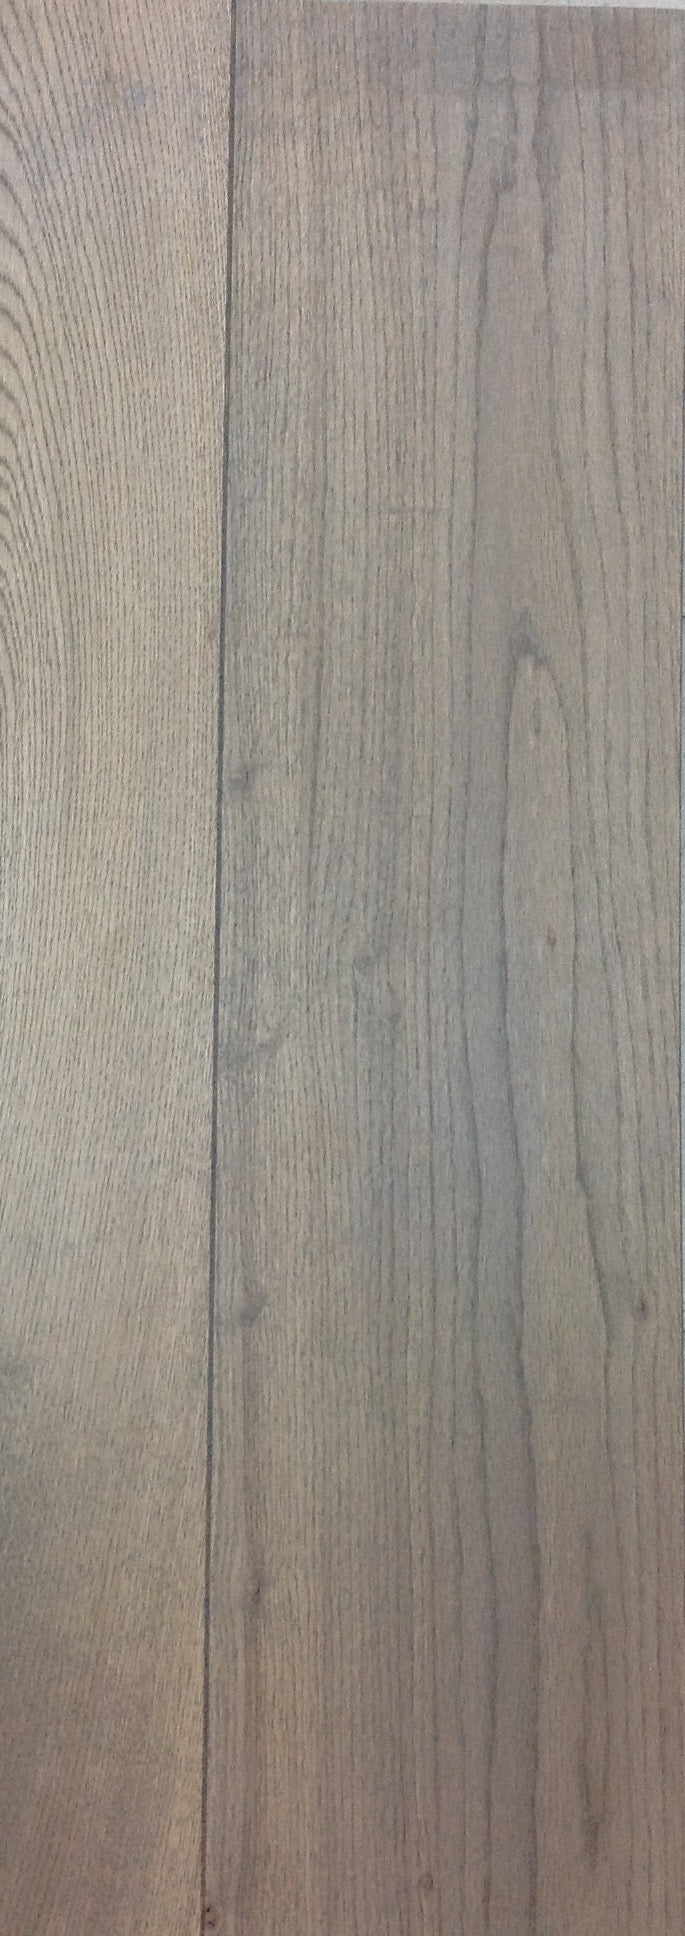 Graphite engineered wood flooring “St James Collection”